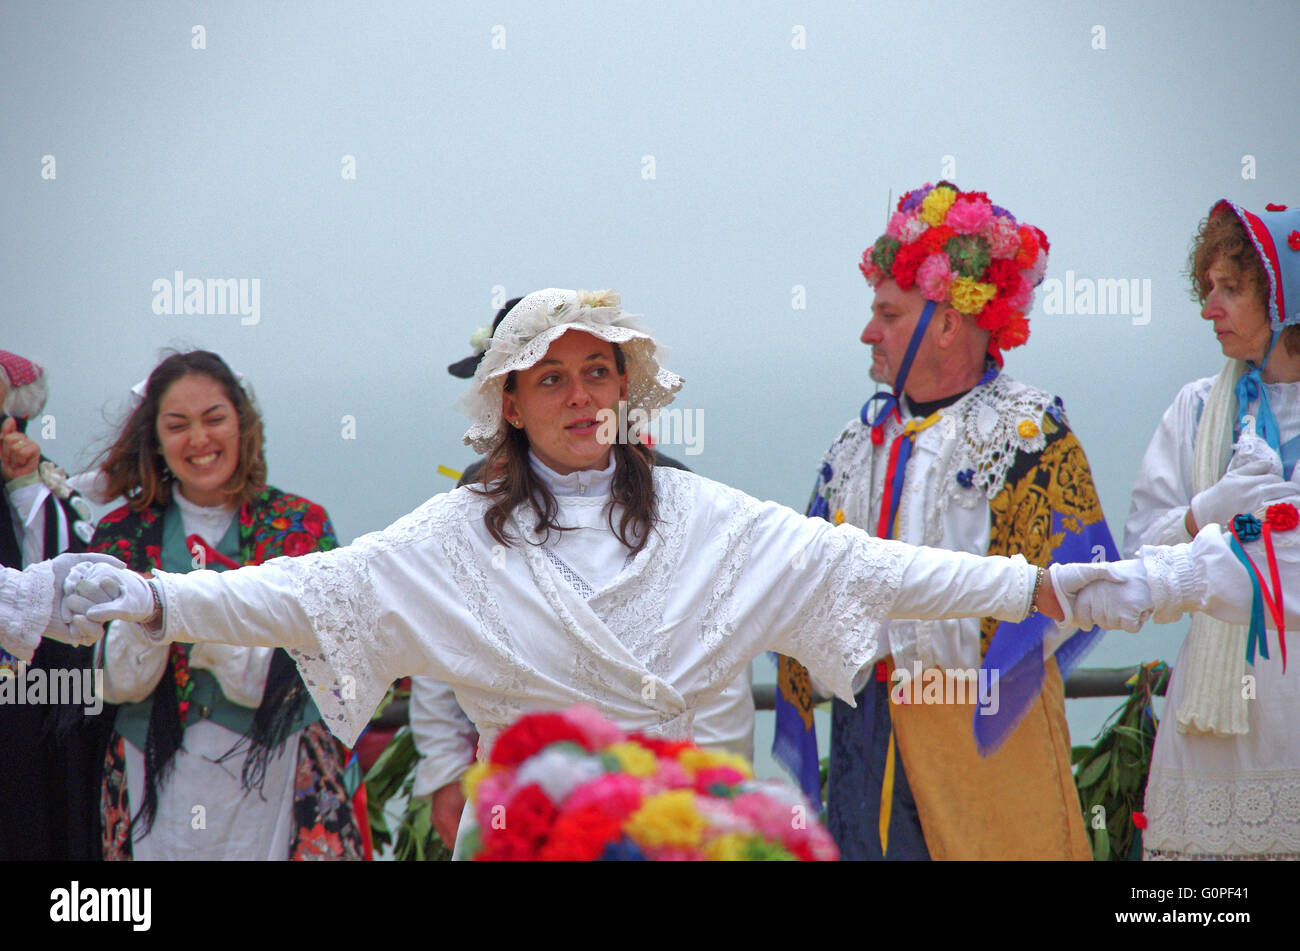 Hastings, East Sussex, UK. 2nd May 2016. The Hastings Jack in the Green festival is a traditional British May Day celebration marking the end of winter and the start of spring, centering on the mysterious figure of Jack in the Green from English folklore and involving Morris dancers and a bizarre costume parade. Credit:  Denis McWilliams/Alamy Live News Stock Photo